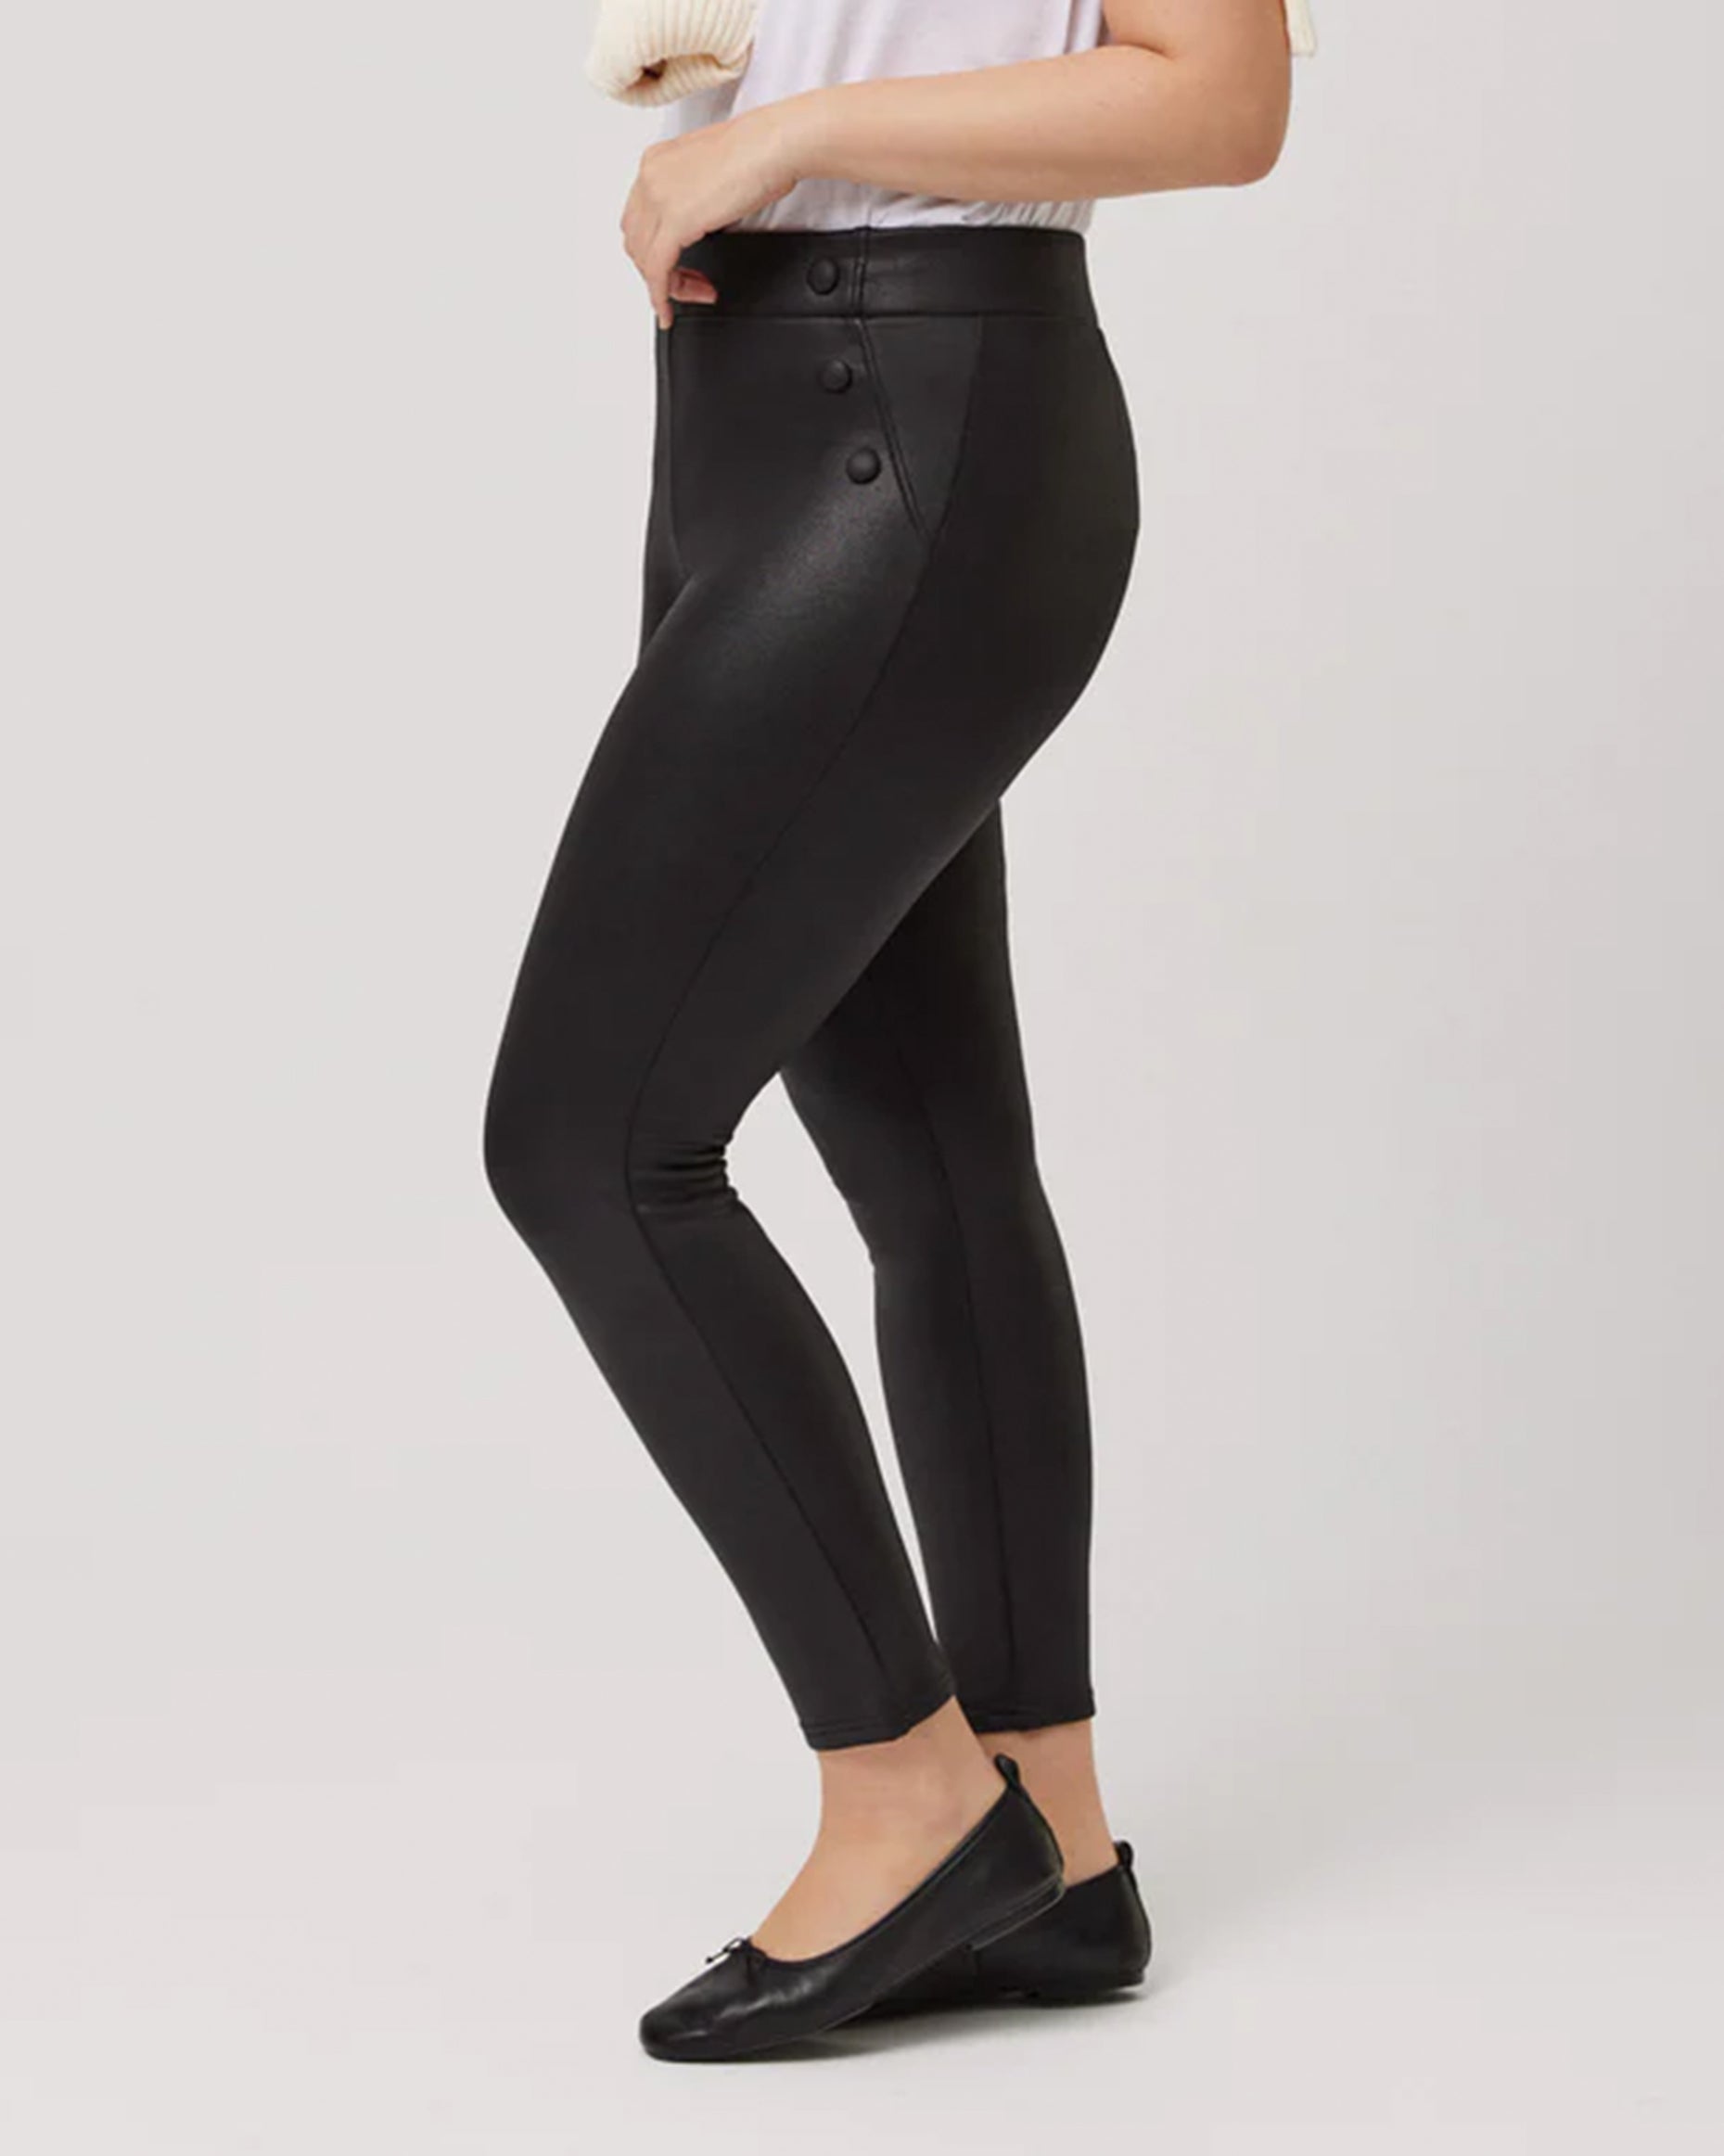 Leather-look leggings for $16? YES PLZ – Jeri Chronicles